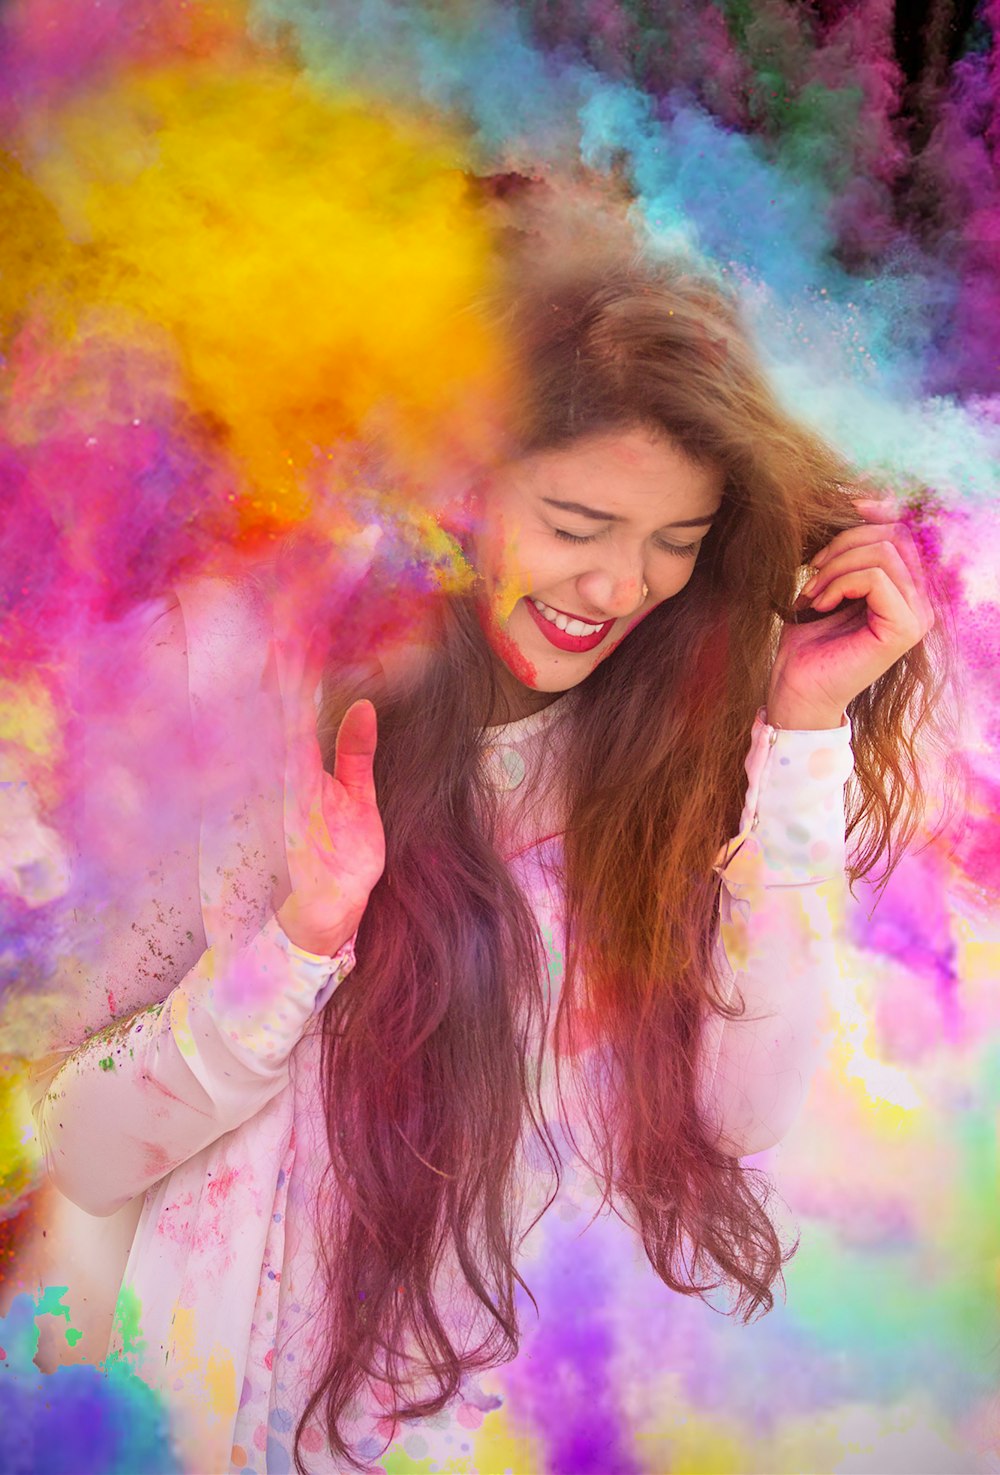 Incredible Compilation of Holi Images HD – 999+ Stunning Holi Images HD in Full 4K